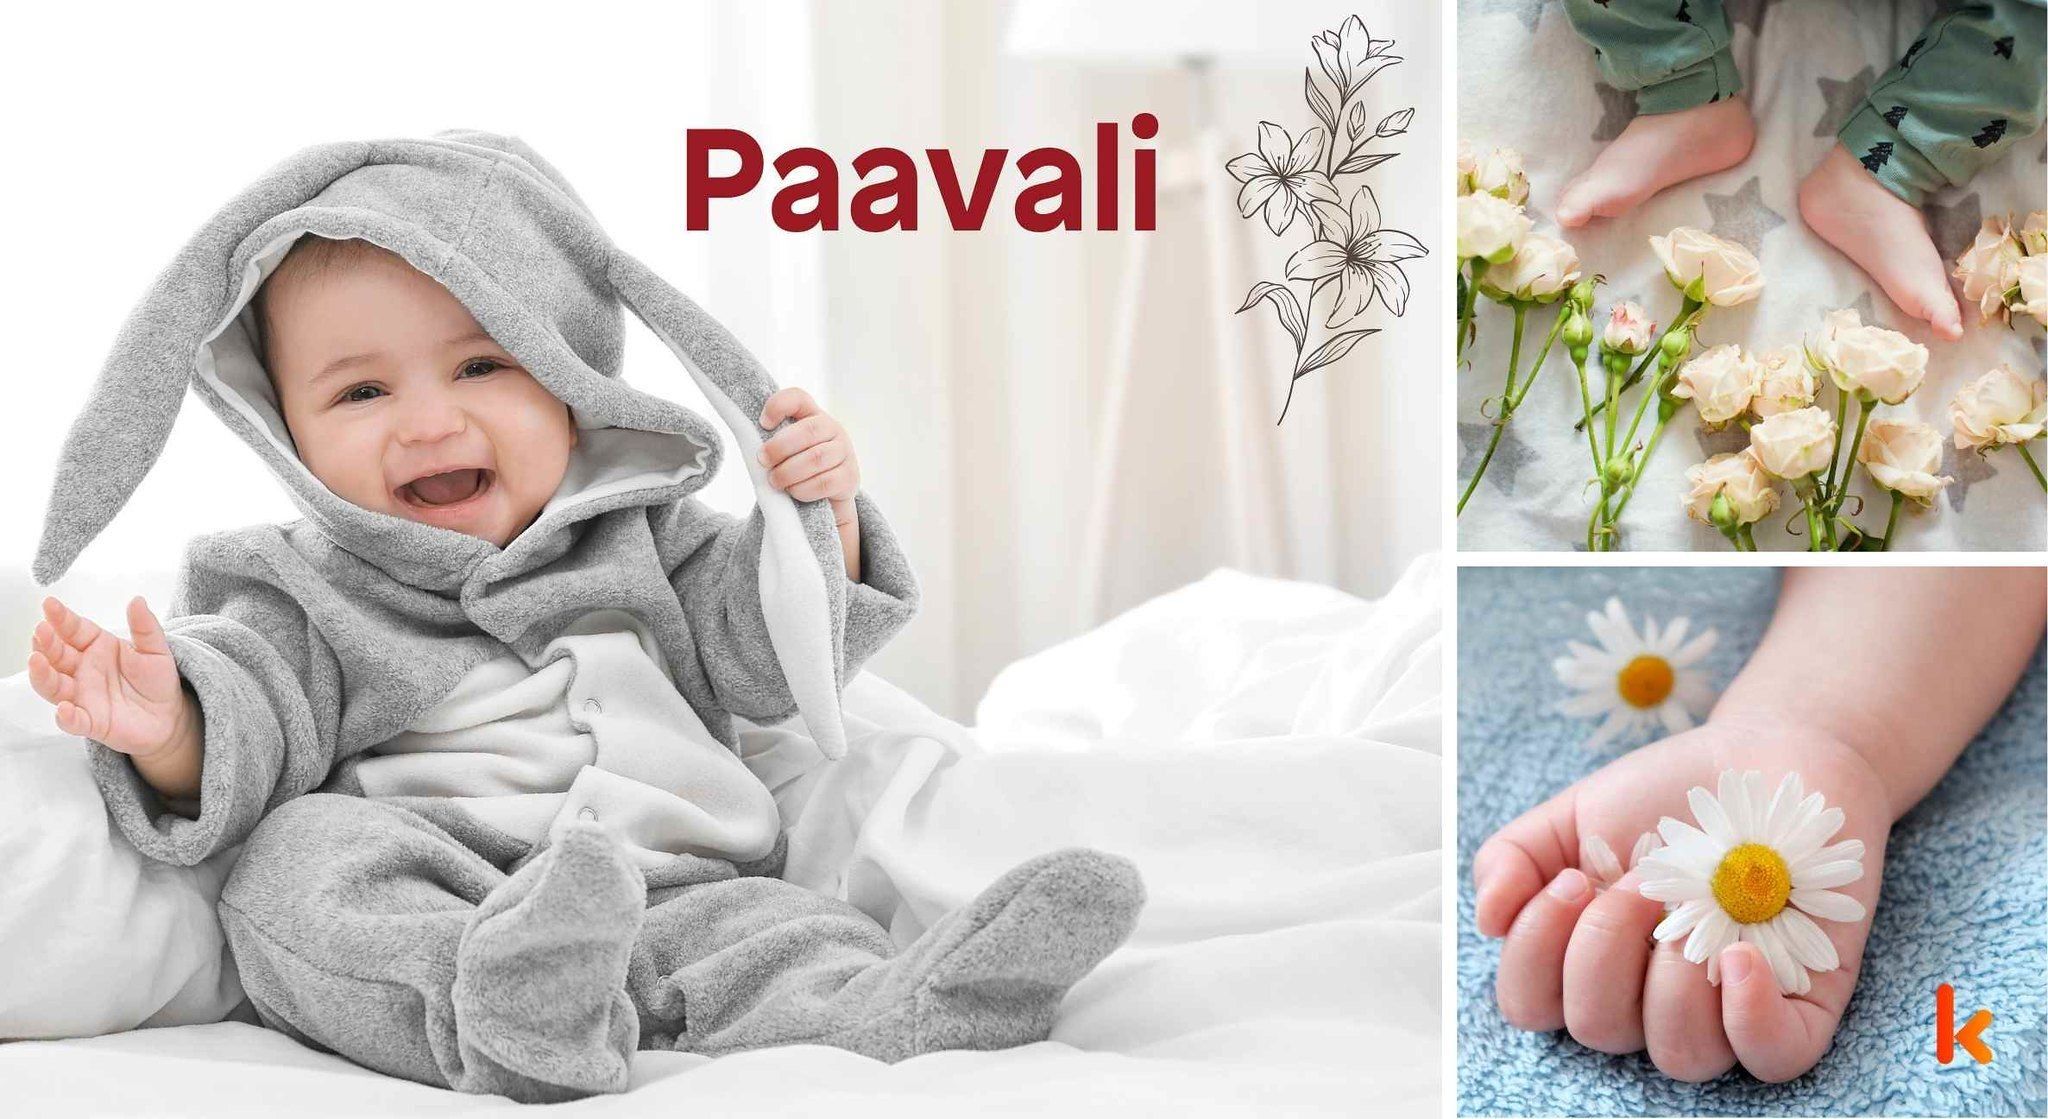 Meaning of the name Paavali